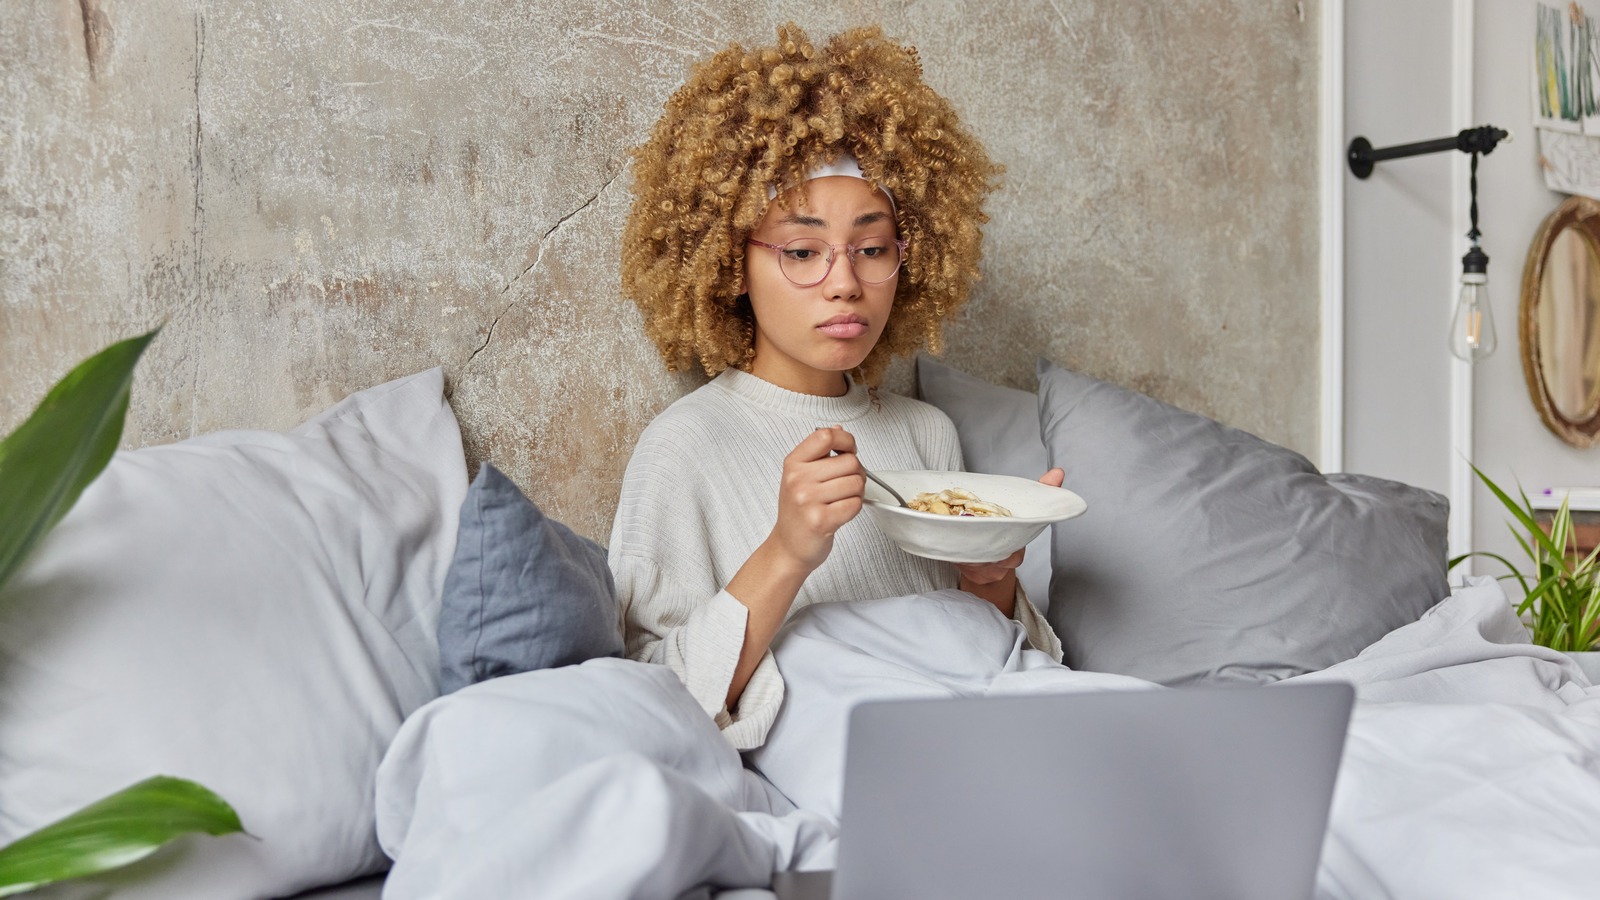 Eat This Unexpected Snack Before Bed To Fall Asleep In Record Time – Health Digest